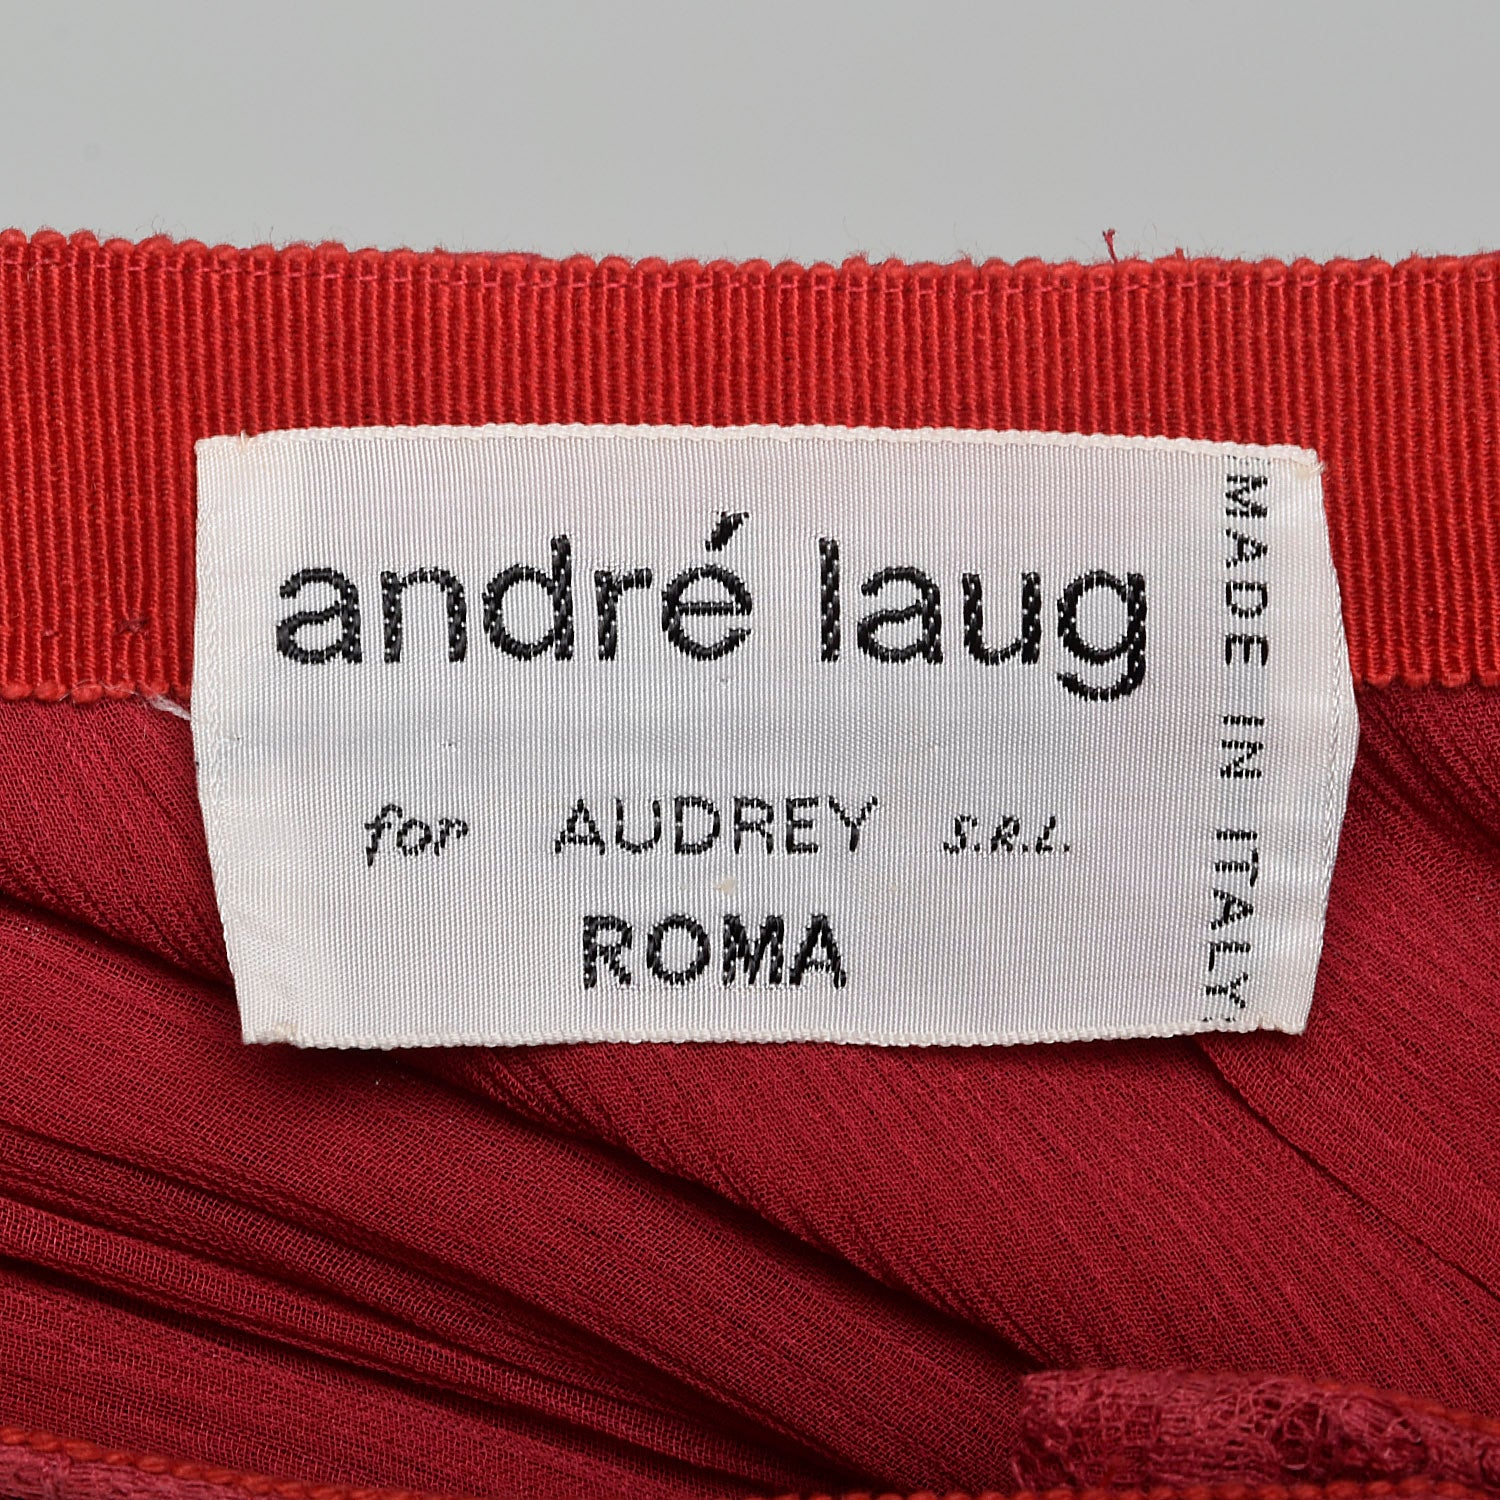 Small 1970s André Laug for Audrey Red Lace Pleated Skirt